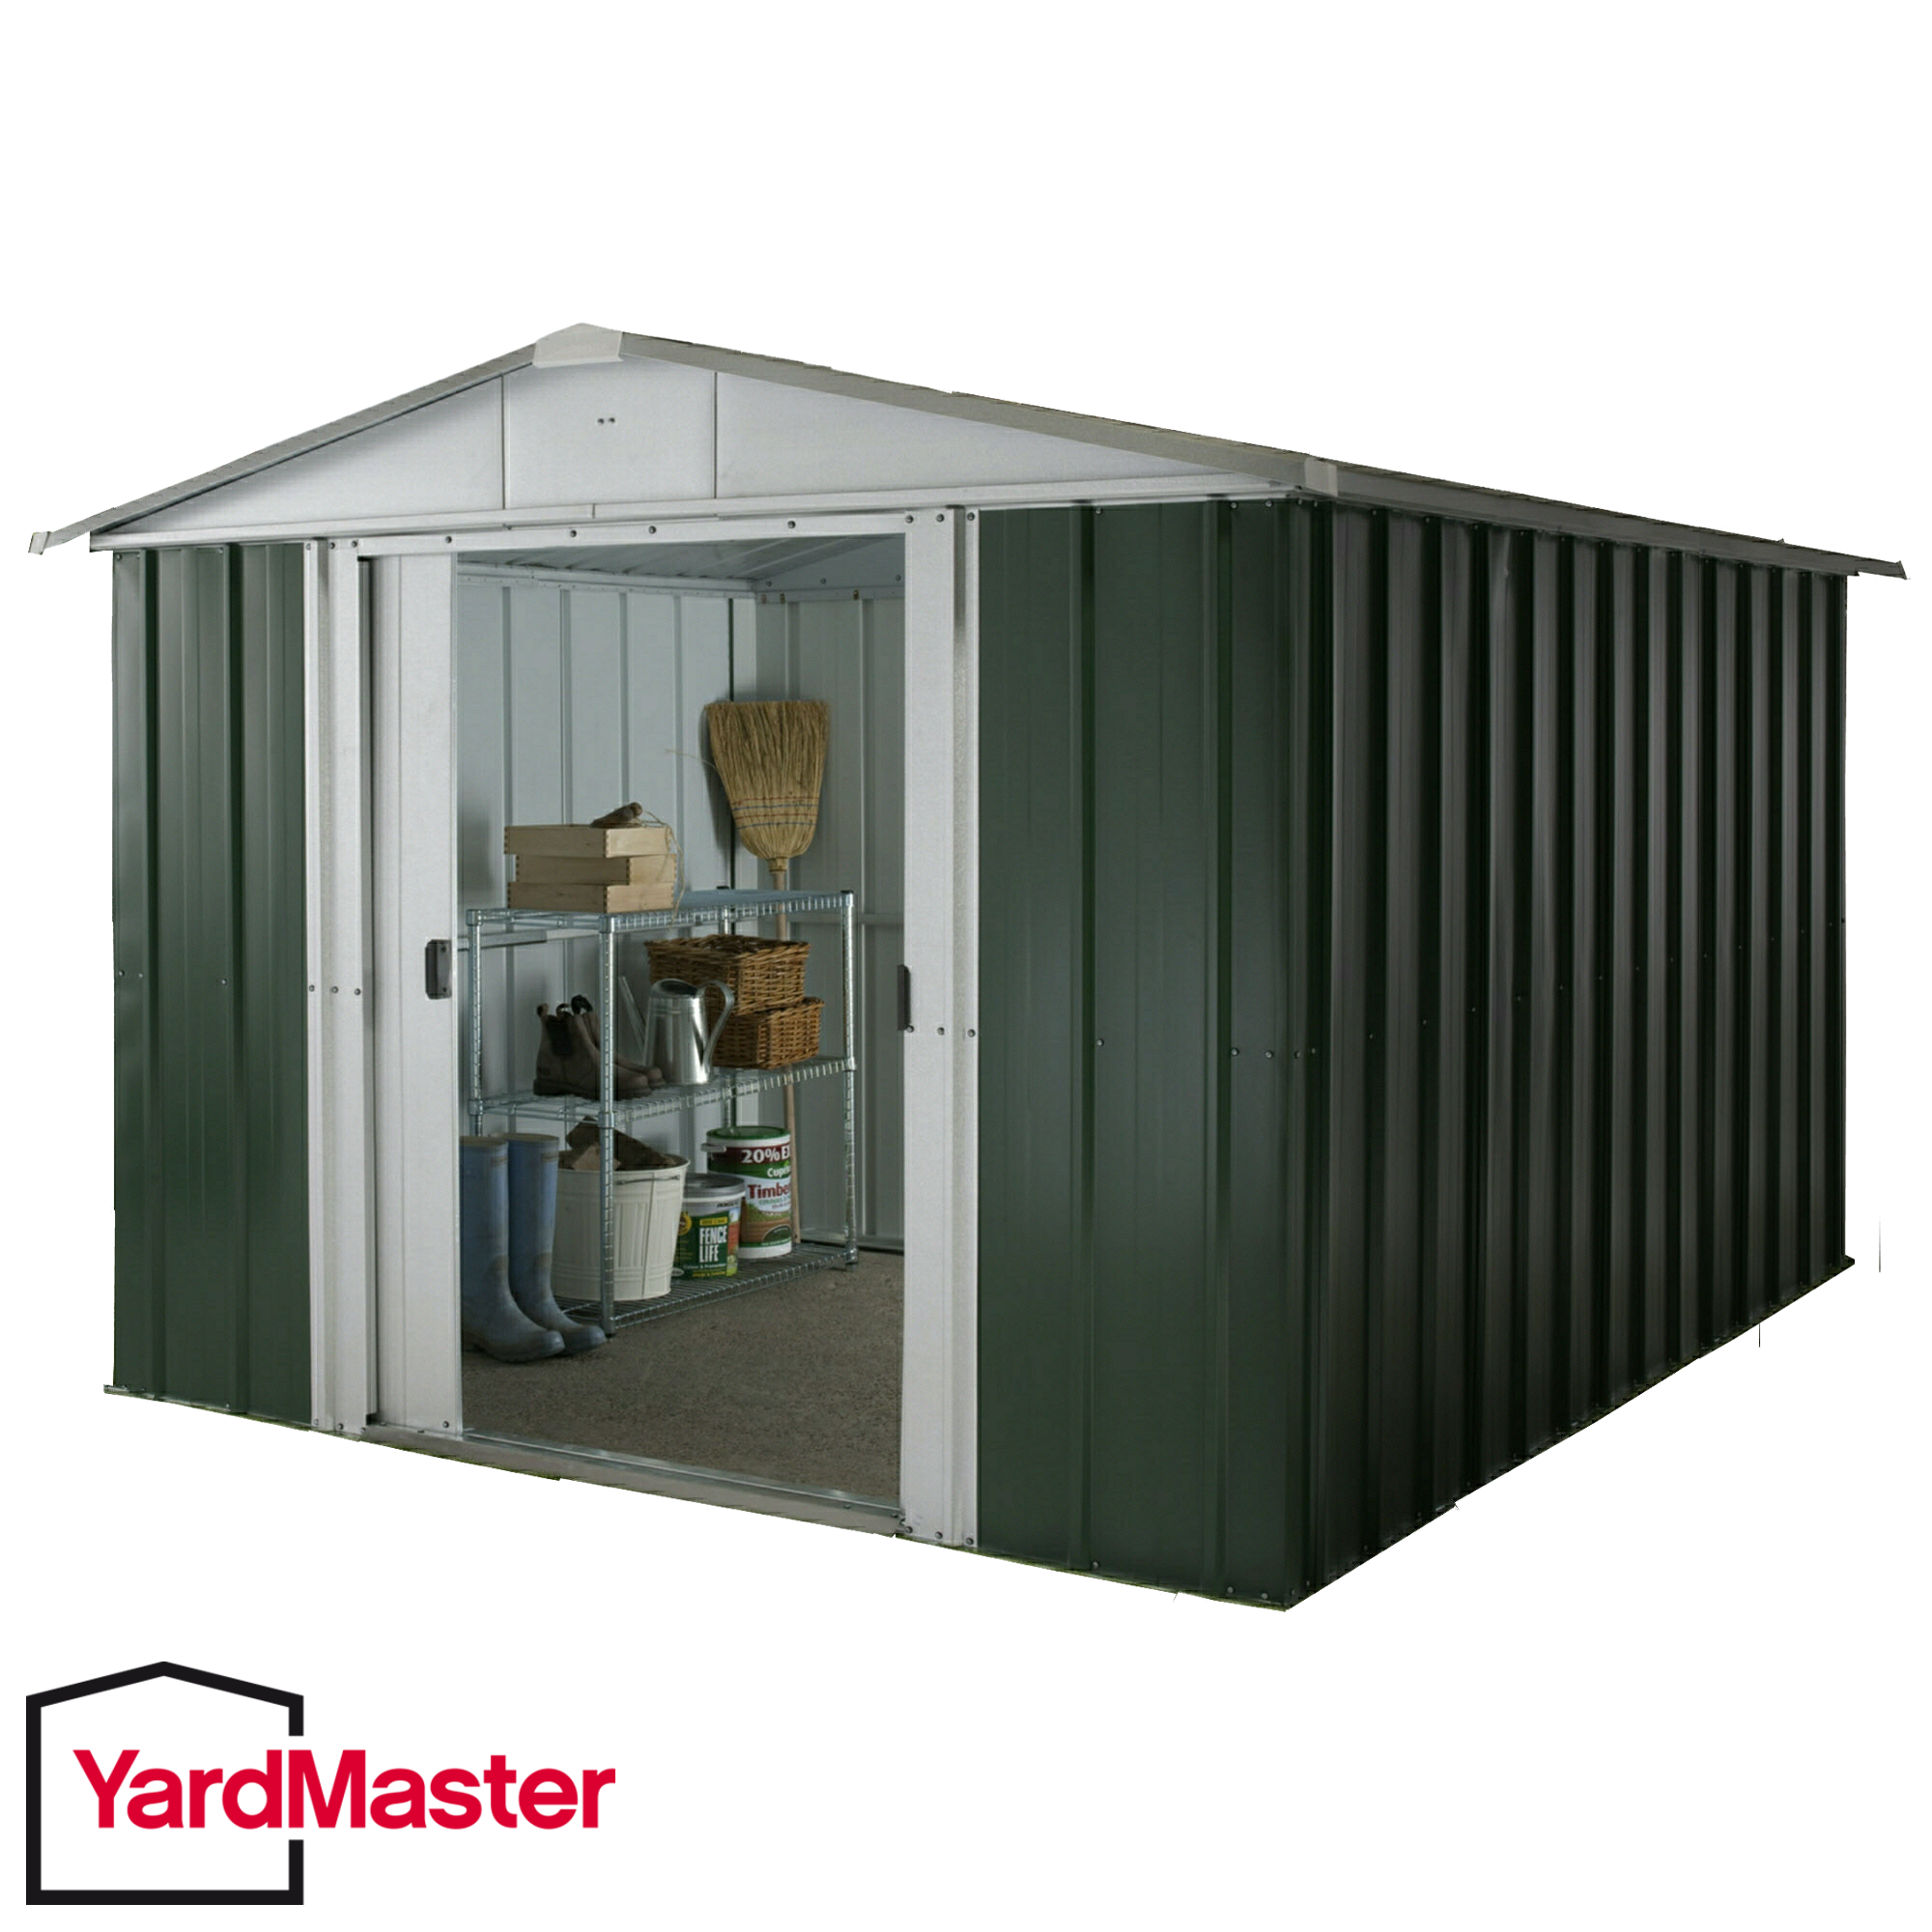 Featured image for “YardMaster 10x13 GEYZ Emerald Deluxe Apex Metal Shed”